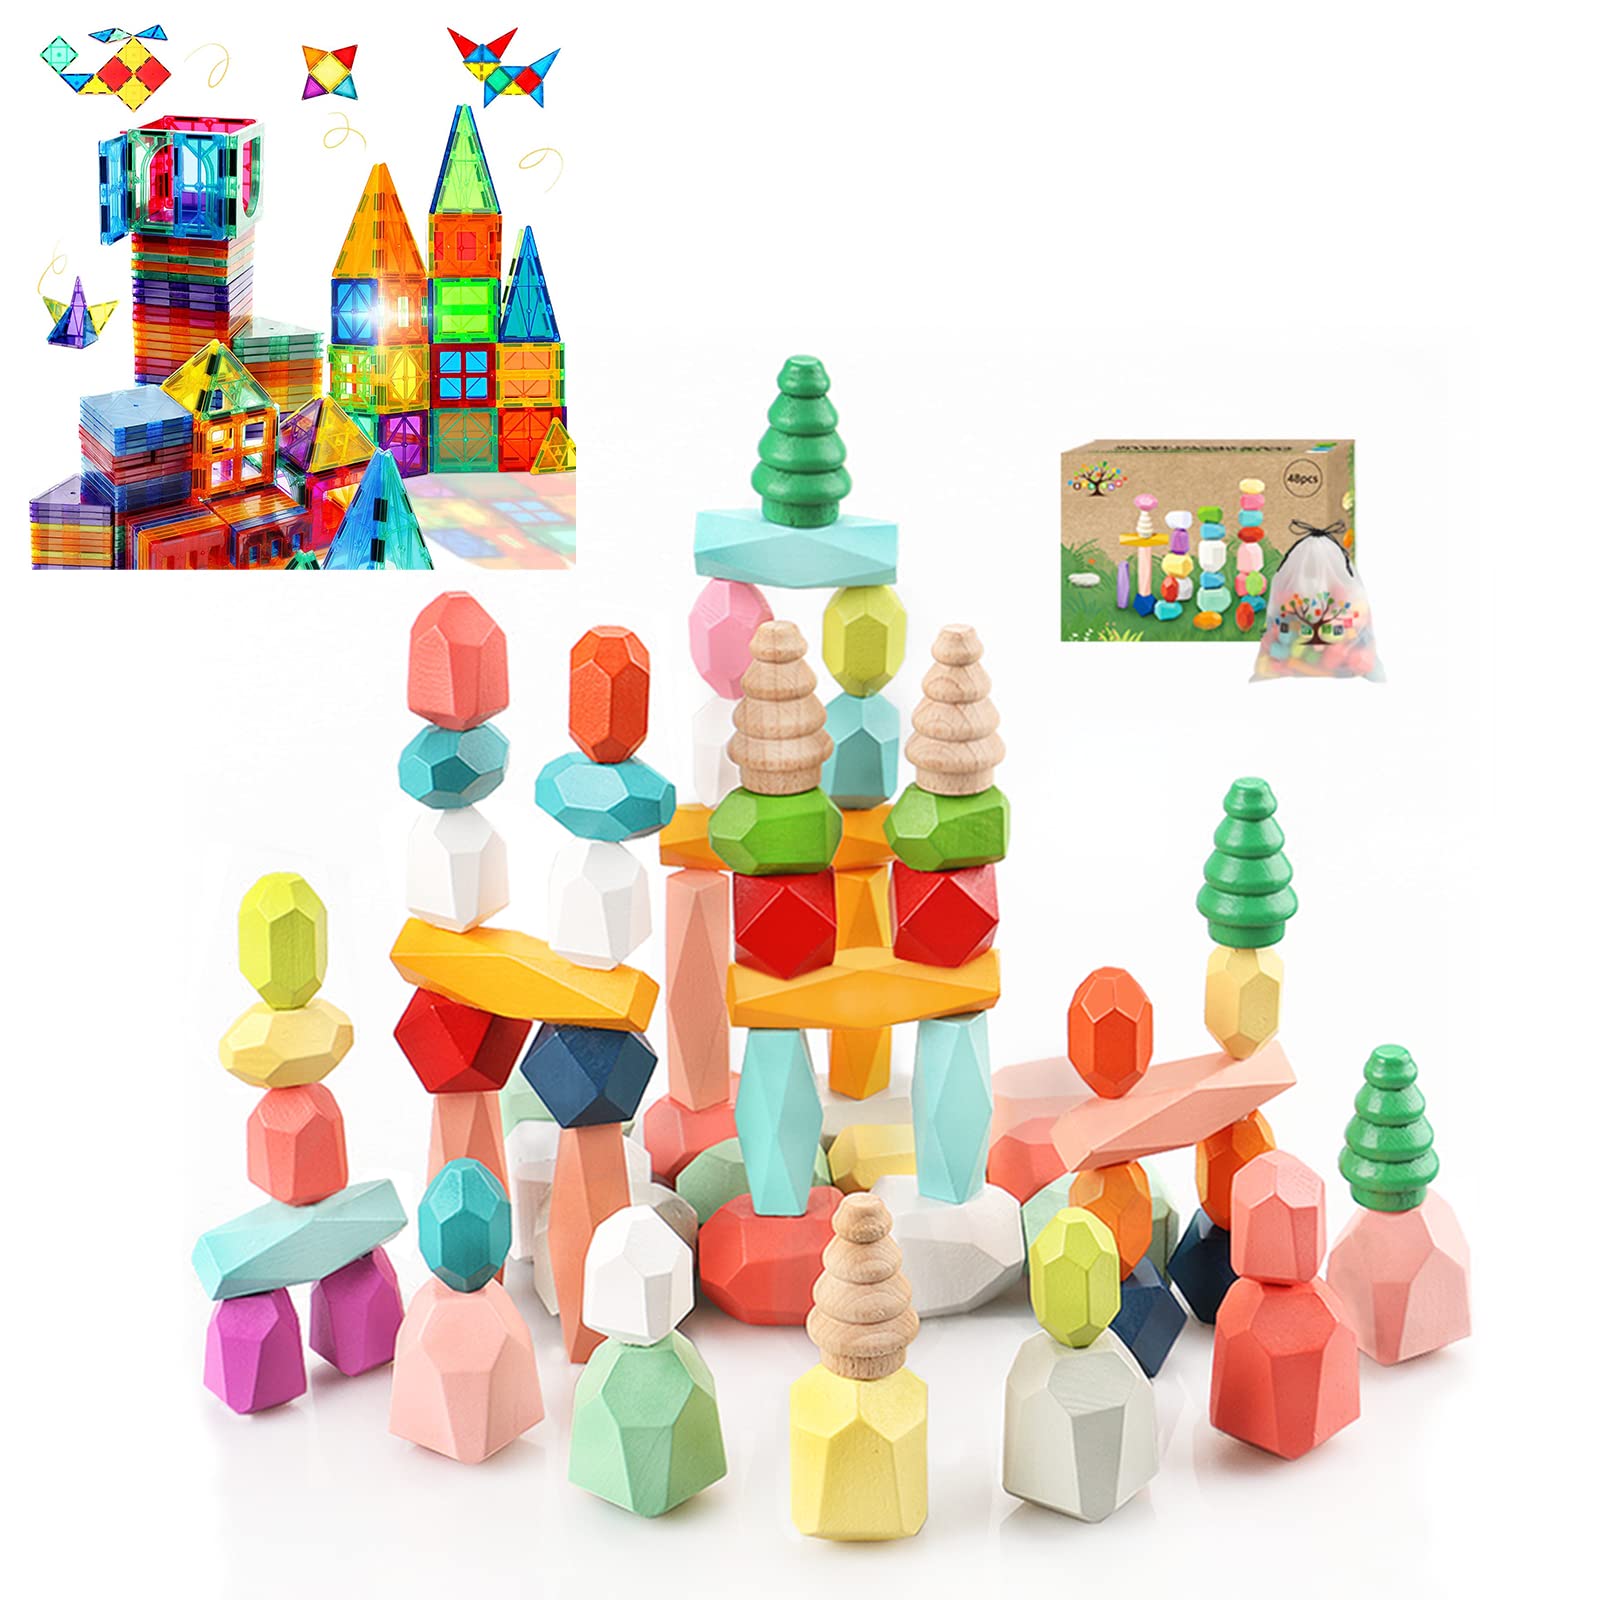 48PCS Wooden Stacking Rocks Building Blocks Montessori Toys for 1 2 3 4 5 6 Year Old Girls and Magnetic Tiles Building Blocks STEM Magnet Blocks Toys for 3+ Year Old Boys and Girls